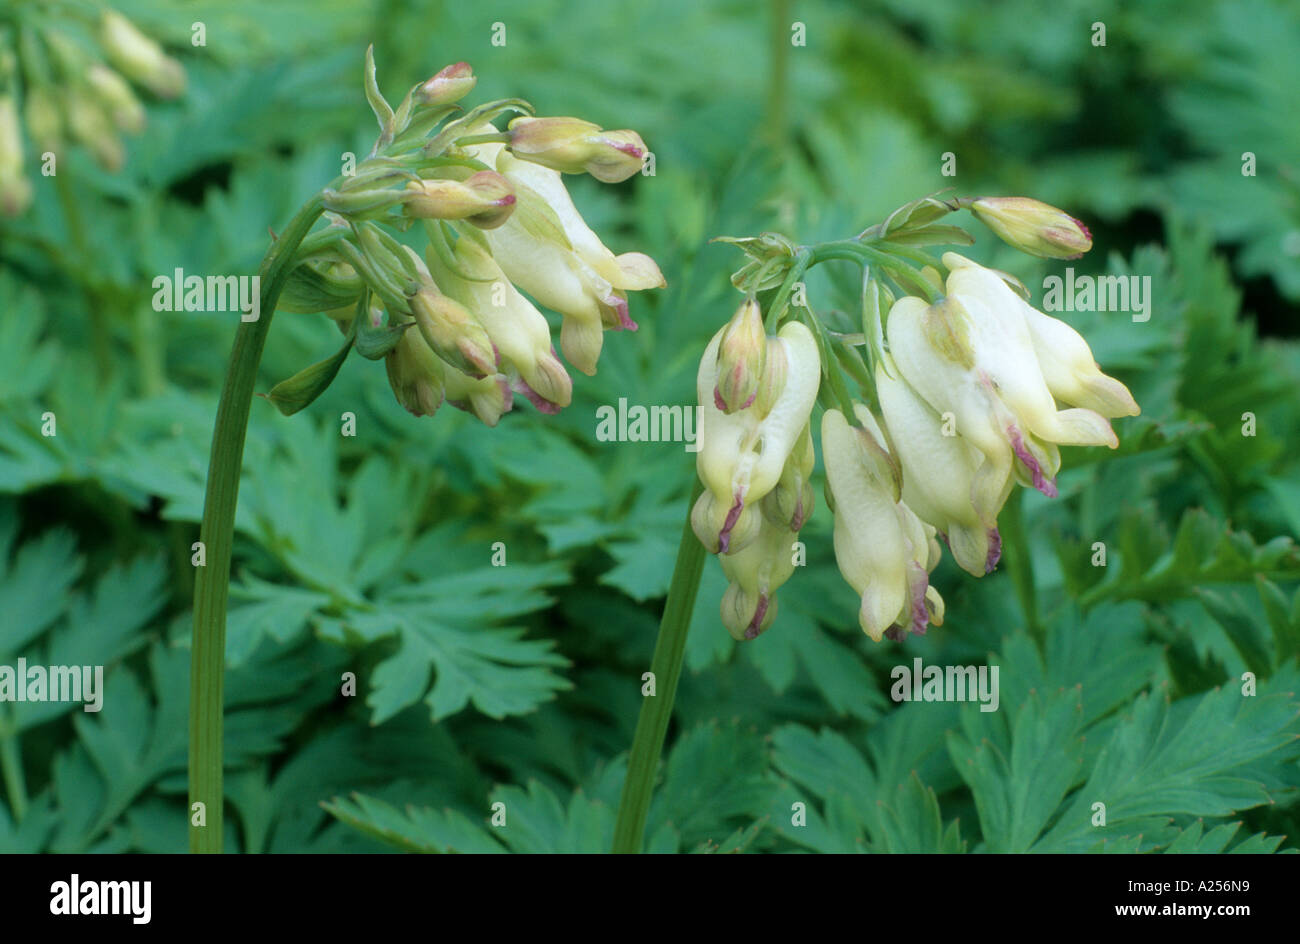 Dicentra formosa alba, heart shaped white flowers, garden plant, horticulture dicentras Stock Photo